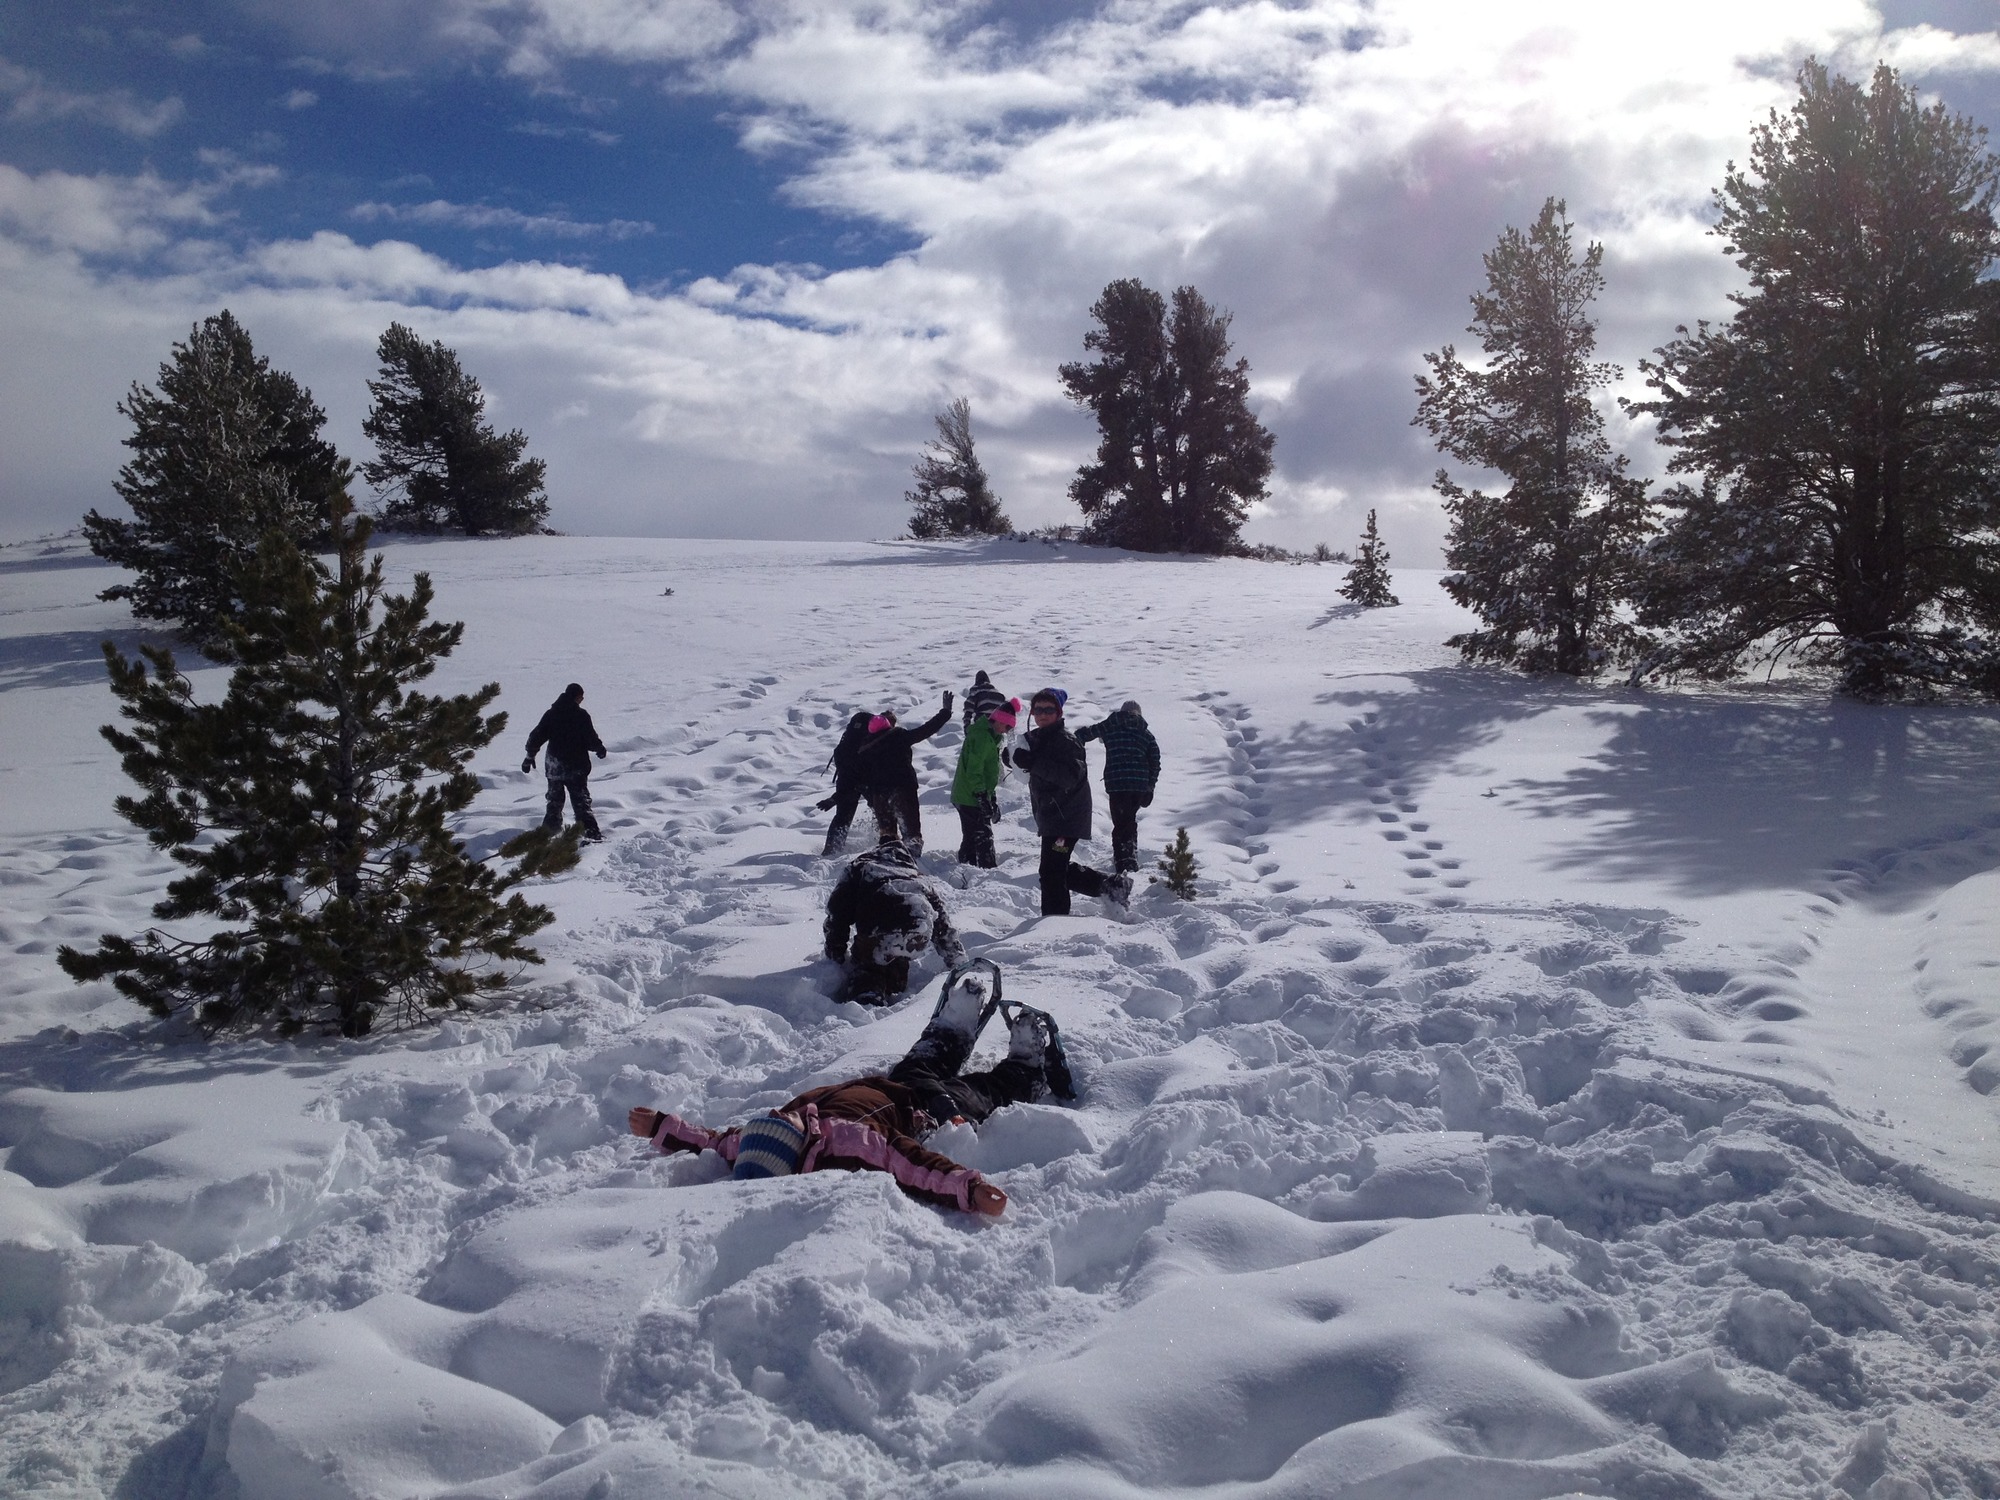 several children on snowshoes, one lying in the snow making snow angels